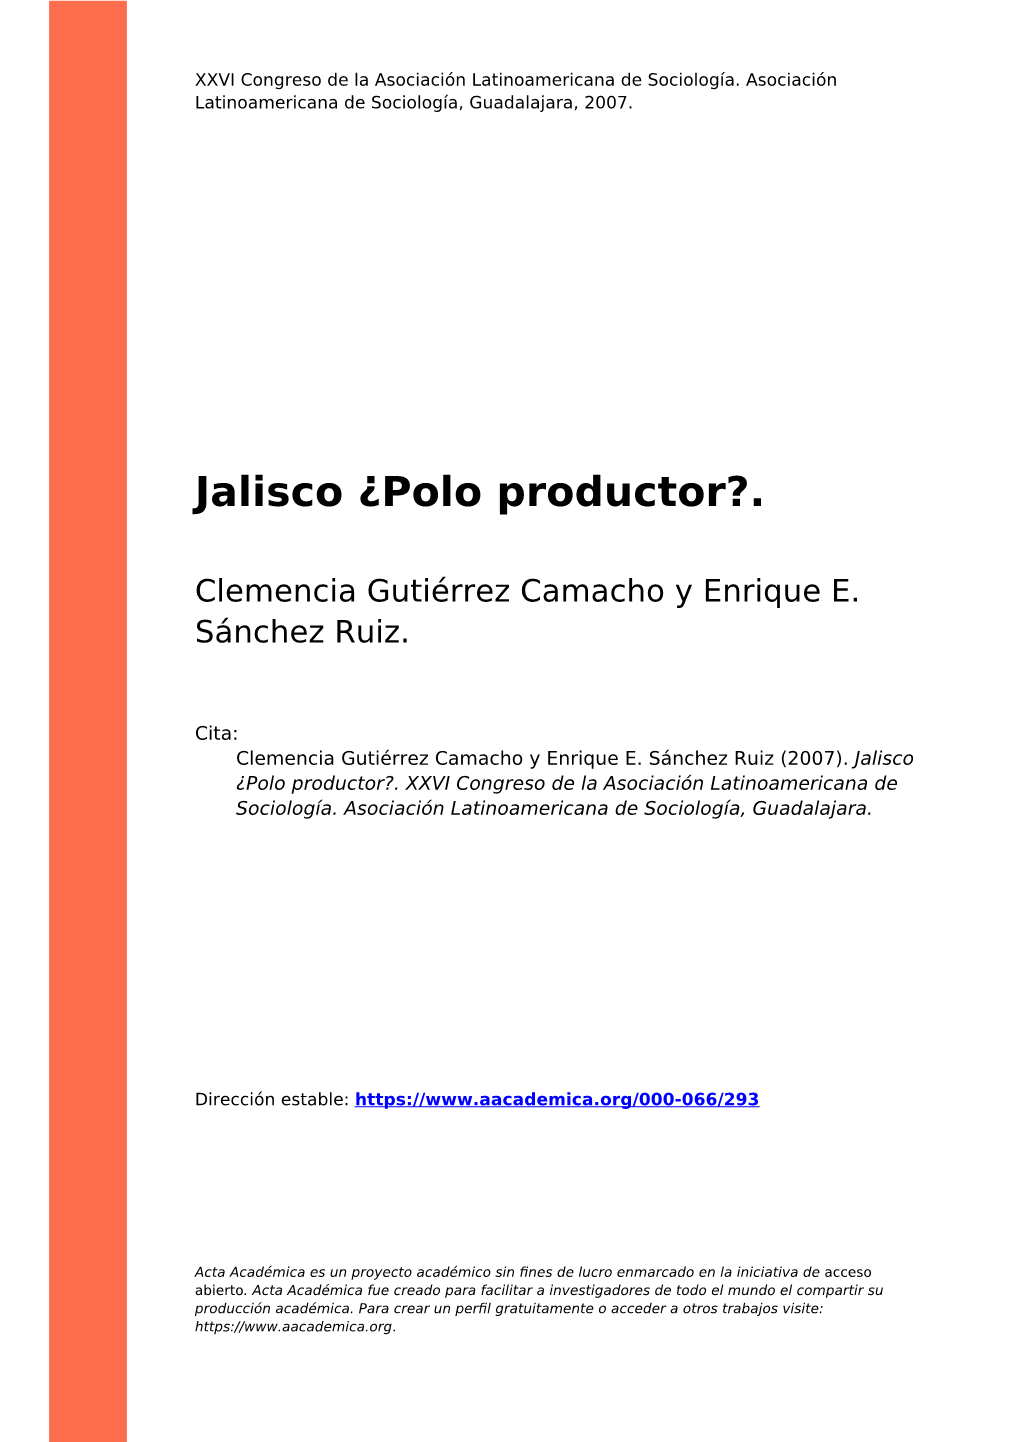 Jalisco ¿Polo Productor?